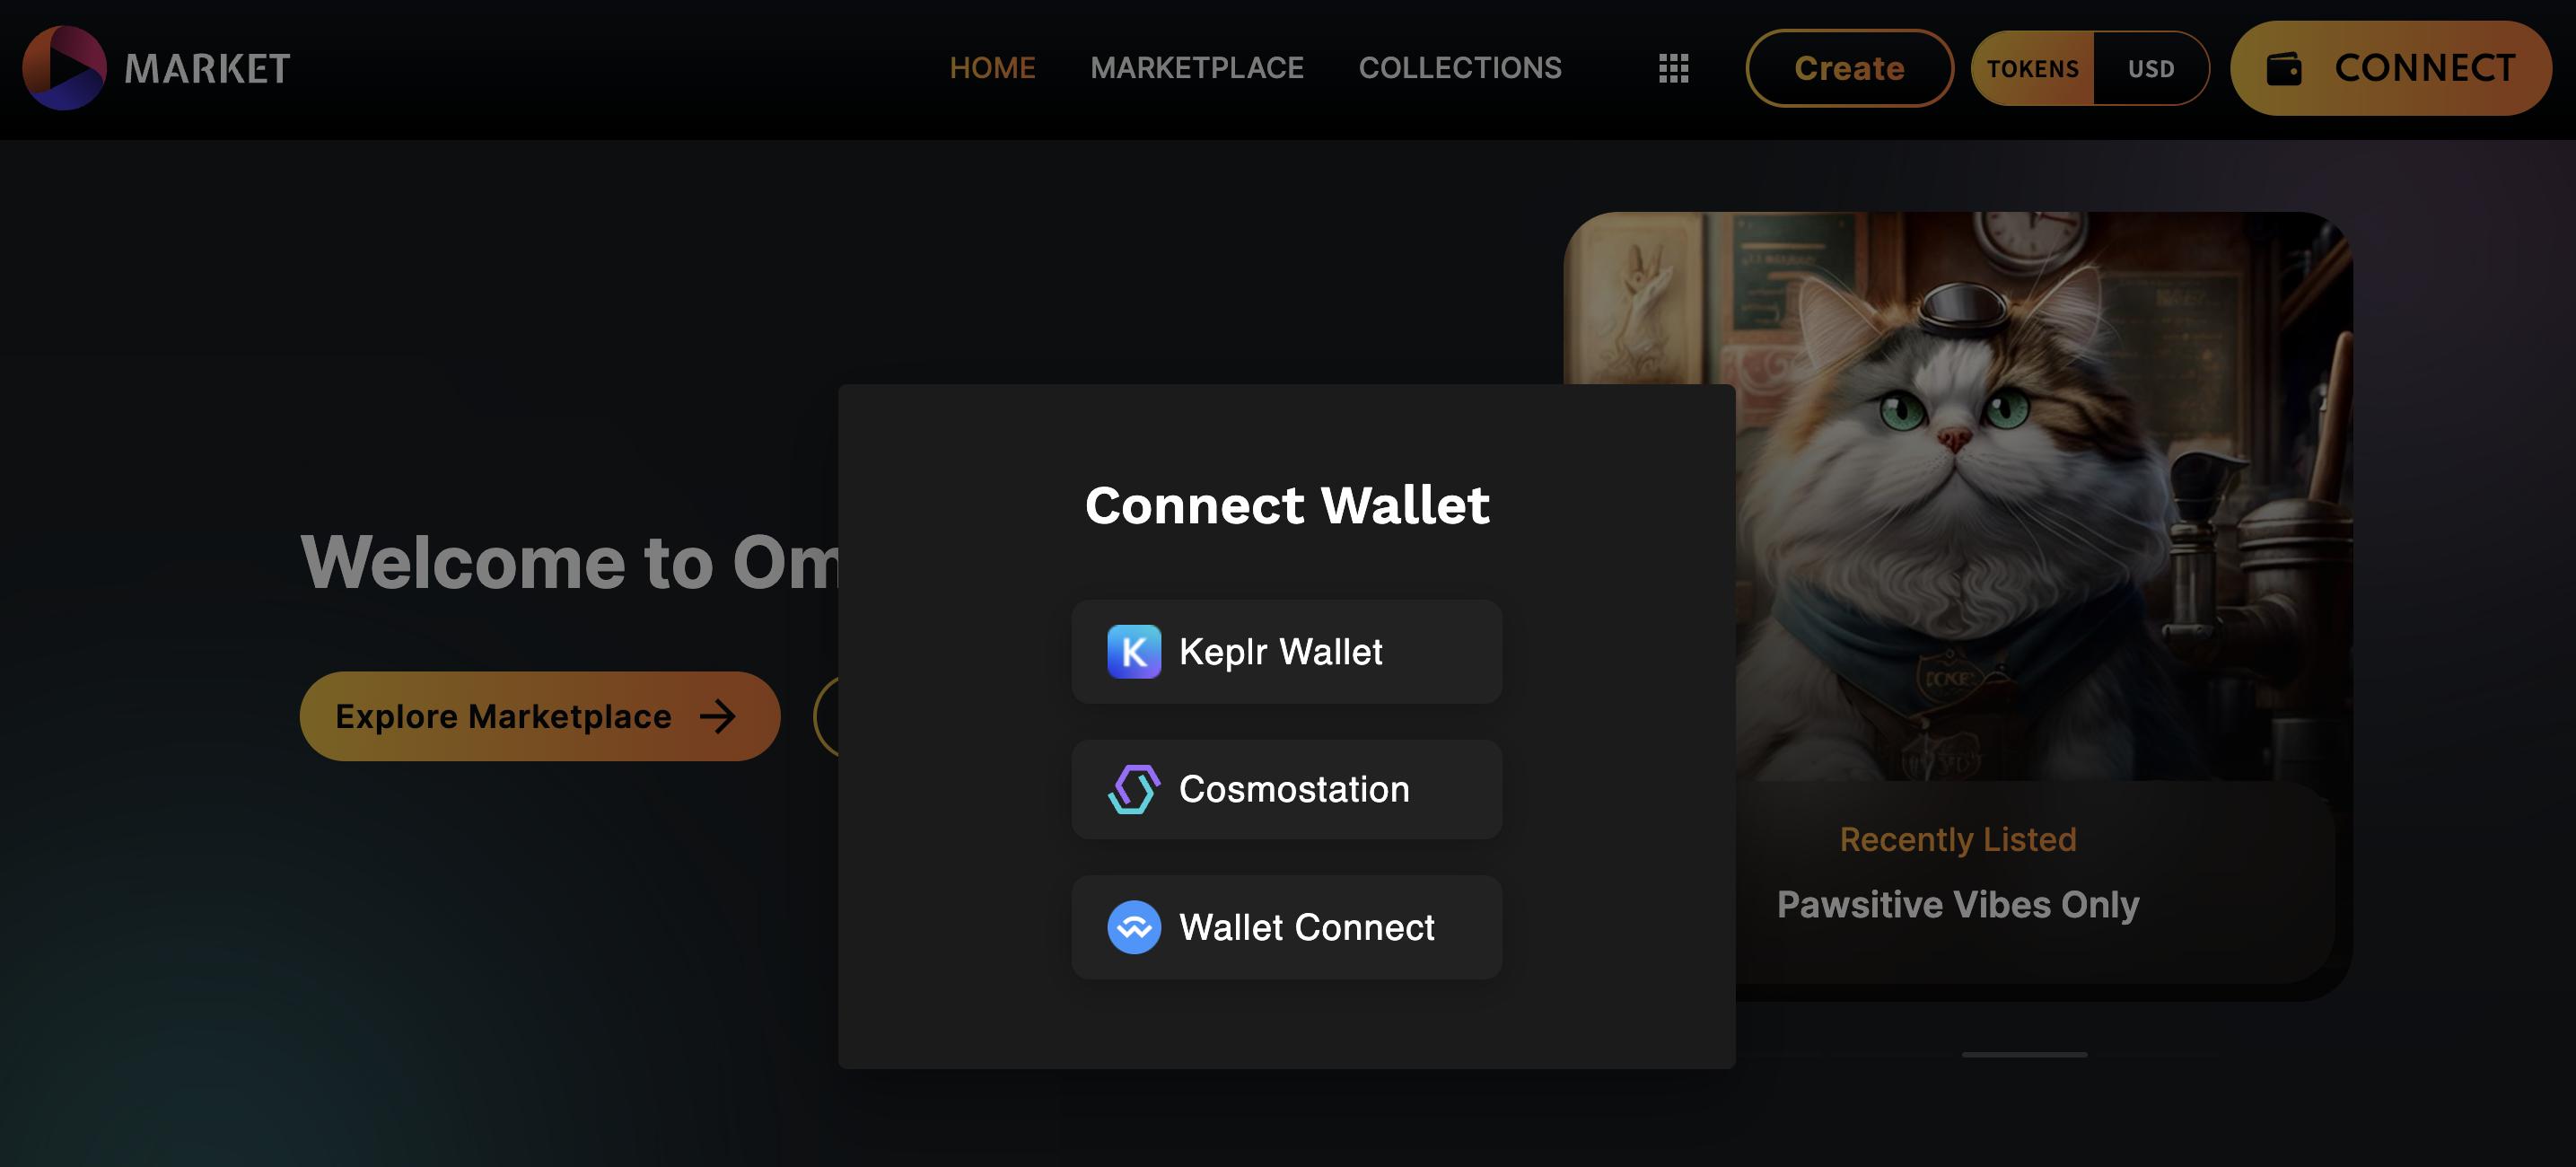 OmniFlix.Market - Now sign in to you account using Cosmostation wallet